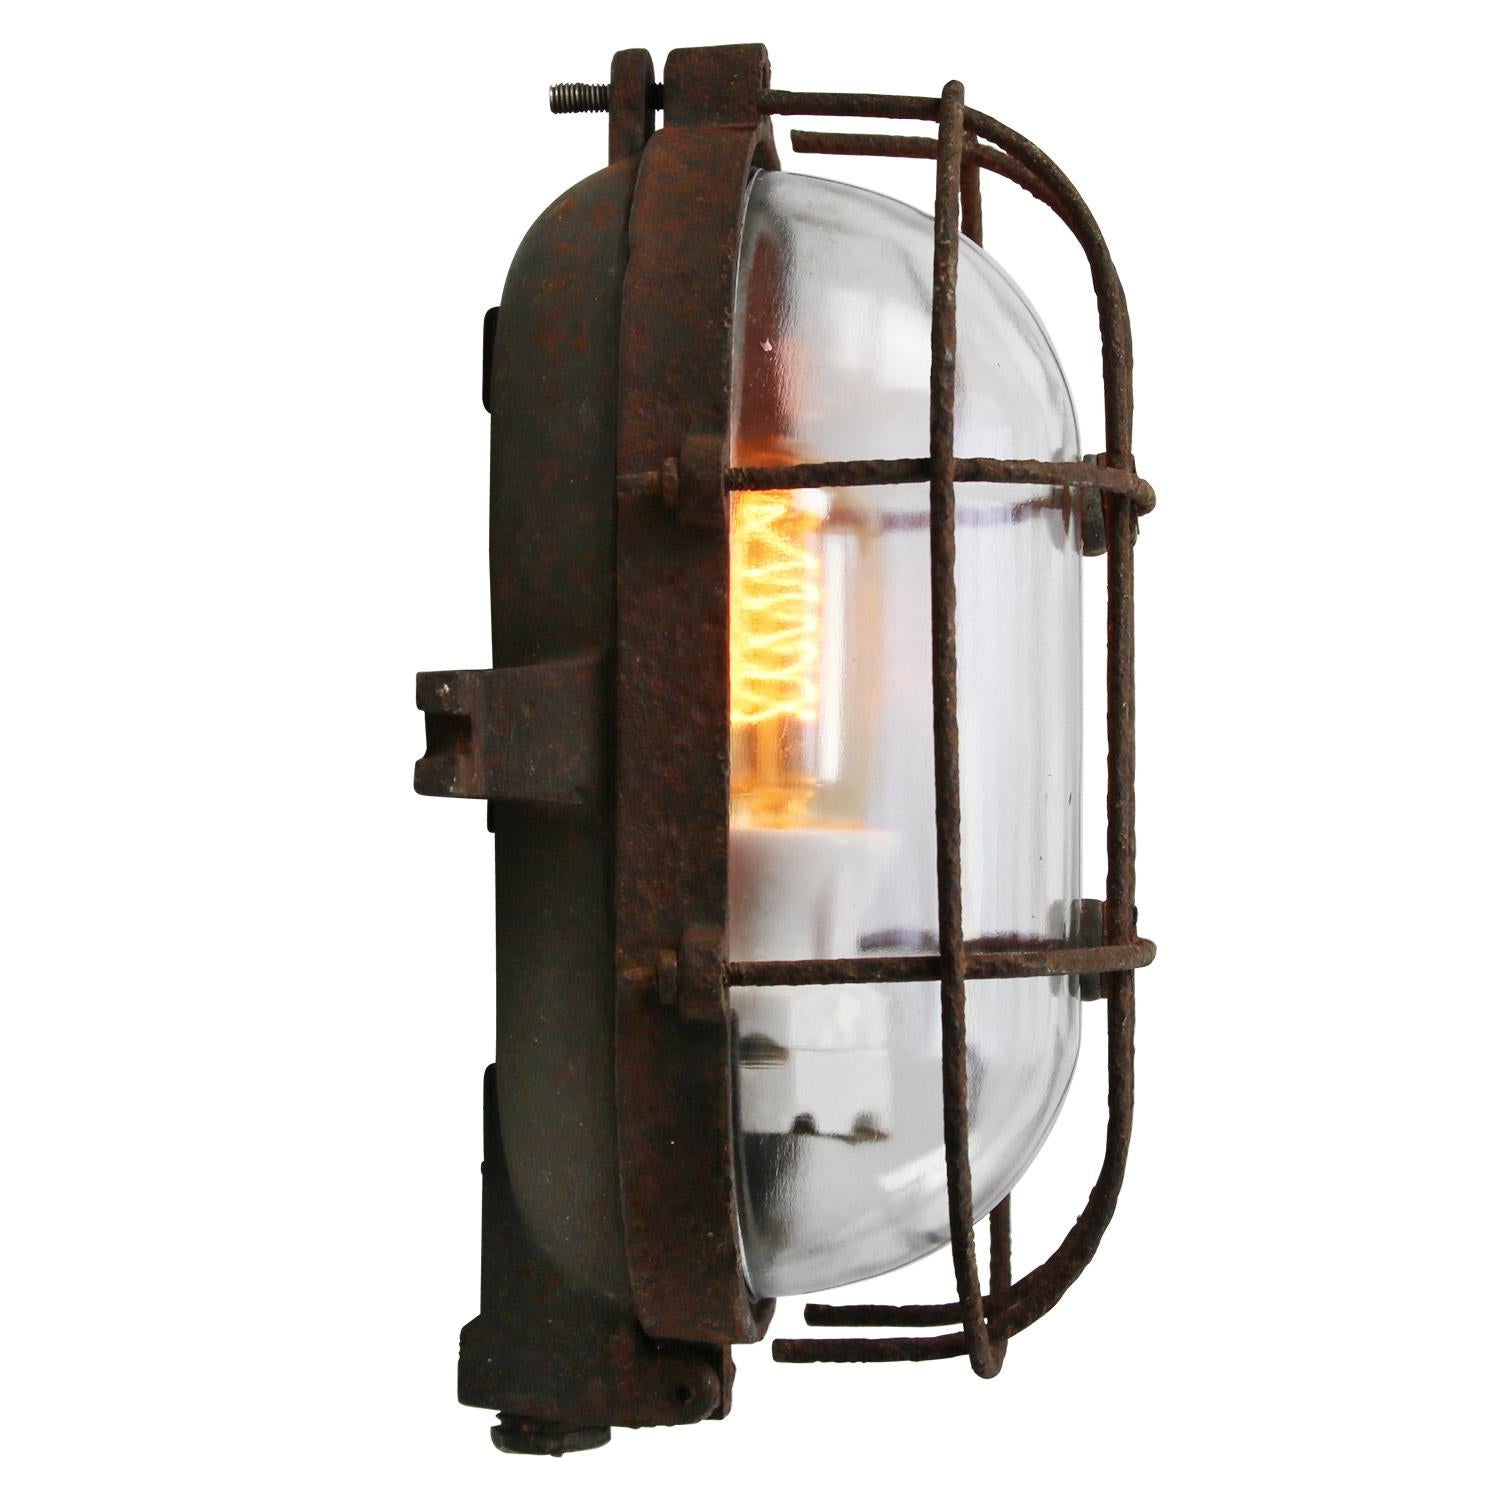 Industrial wall ceiling scones
Cast iron clear glass

Weight: 2.78 kg / 6.1 lb

Priced per individual item. All lamps have been made suitable by international standards for incandescent light bulbs, energy-efficient and LED bulbs. E26/E27 bulb